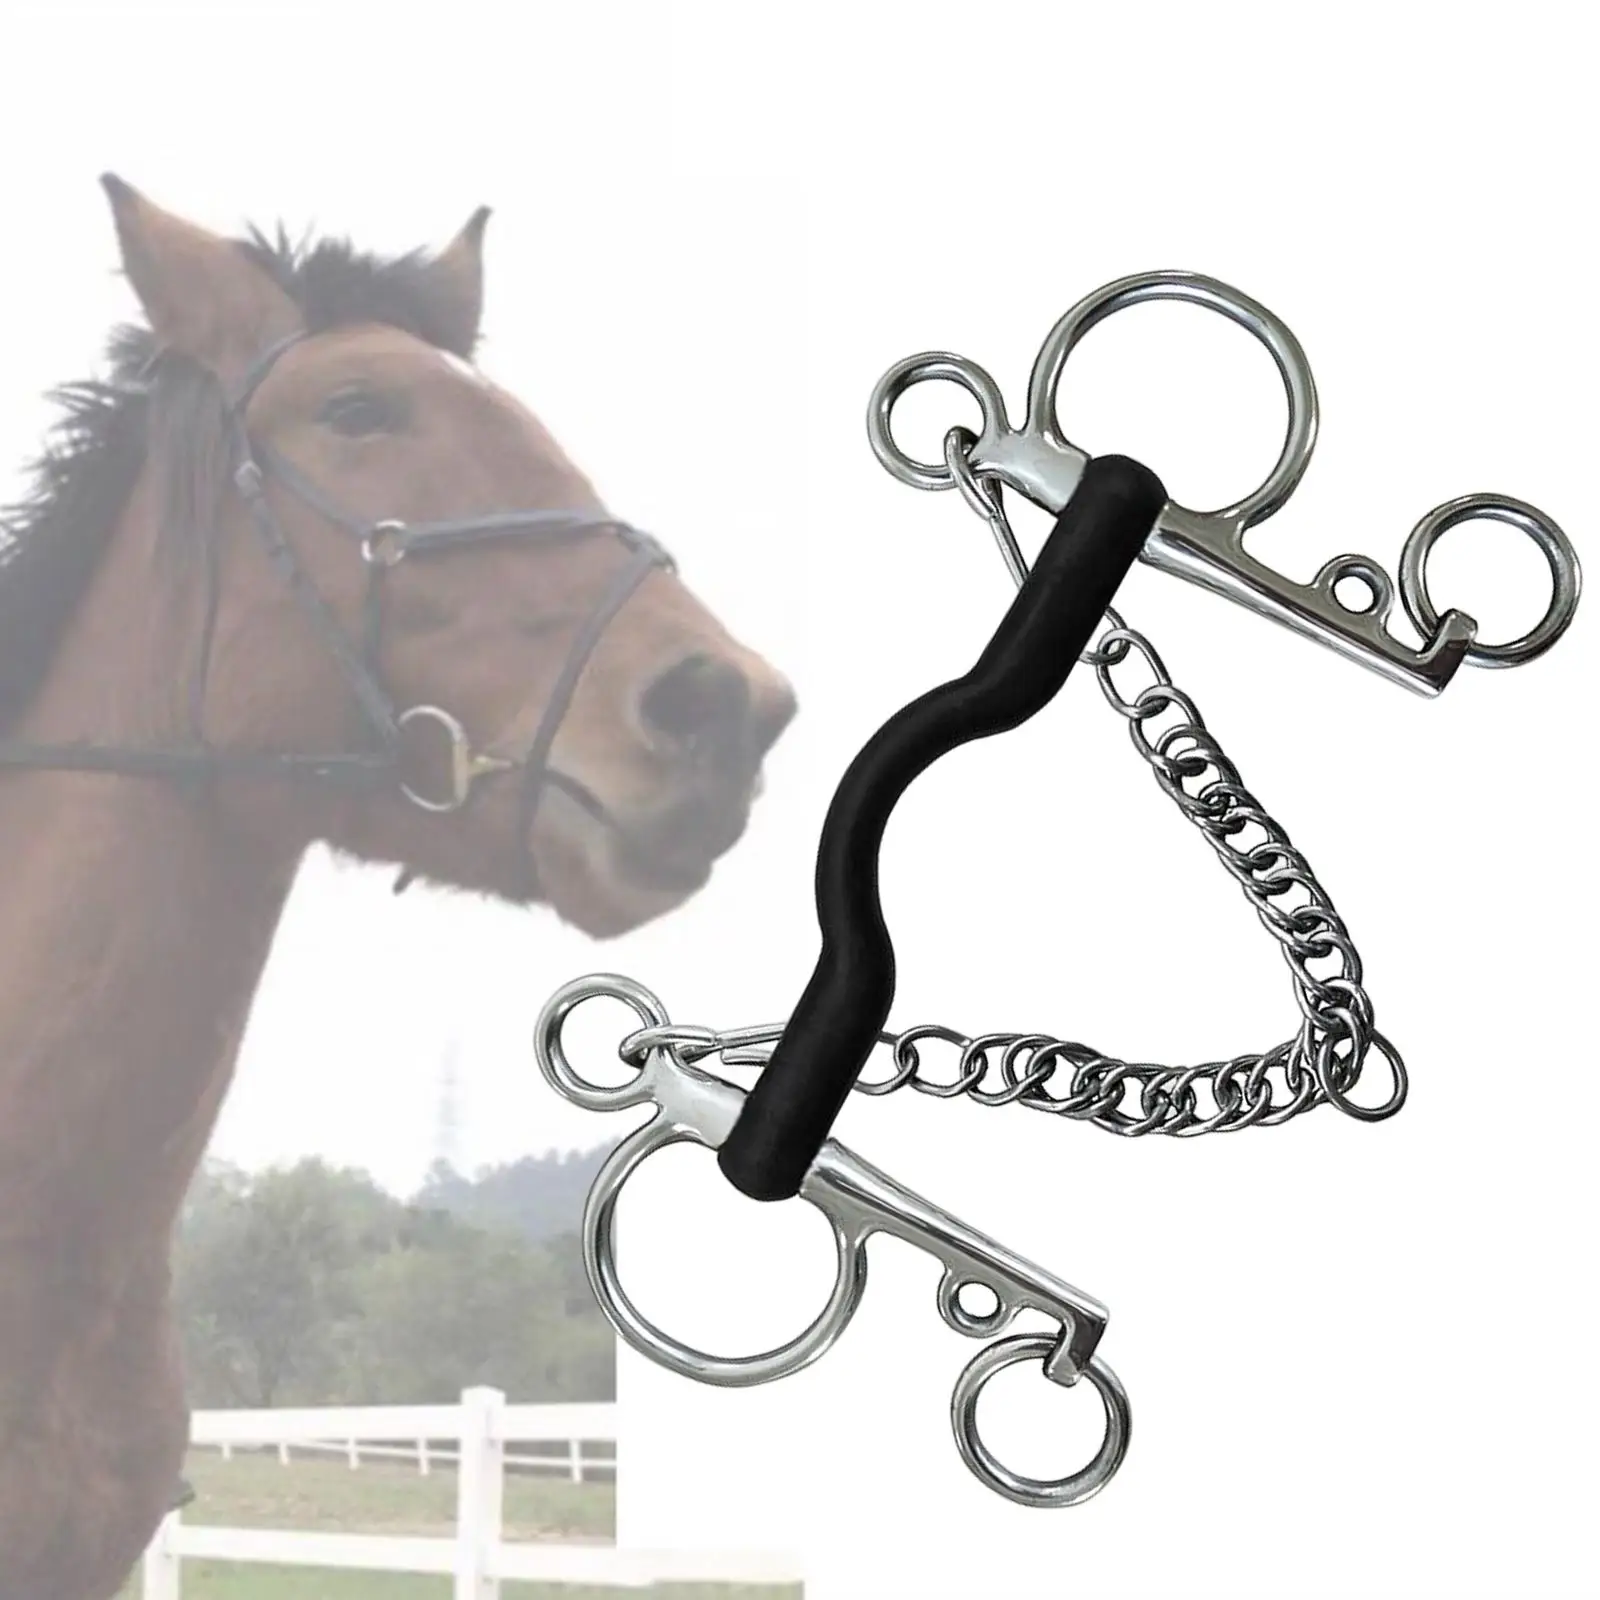 Durable Horse Bit W/Curb Hooks Chain Horse Gag Bit Stainless Steel with Silver